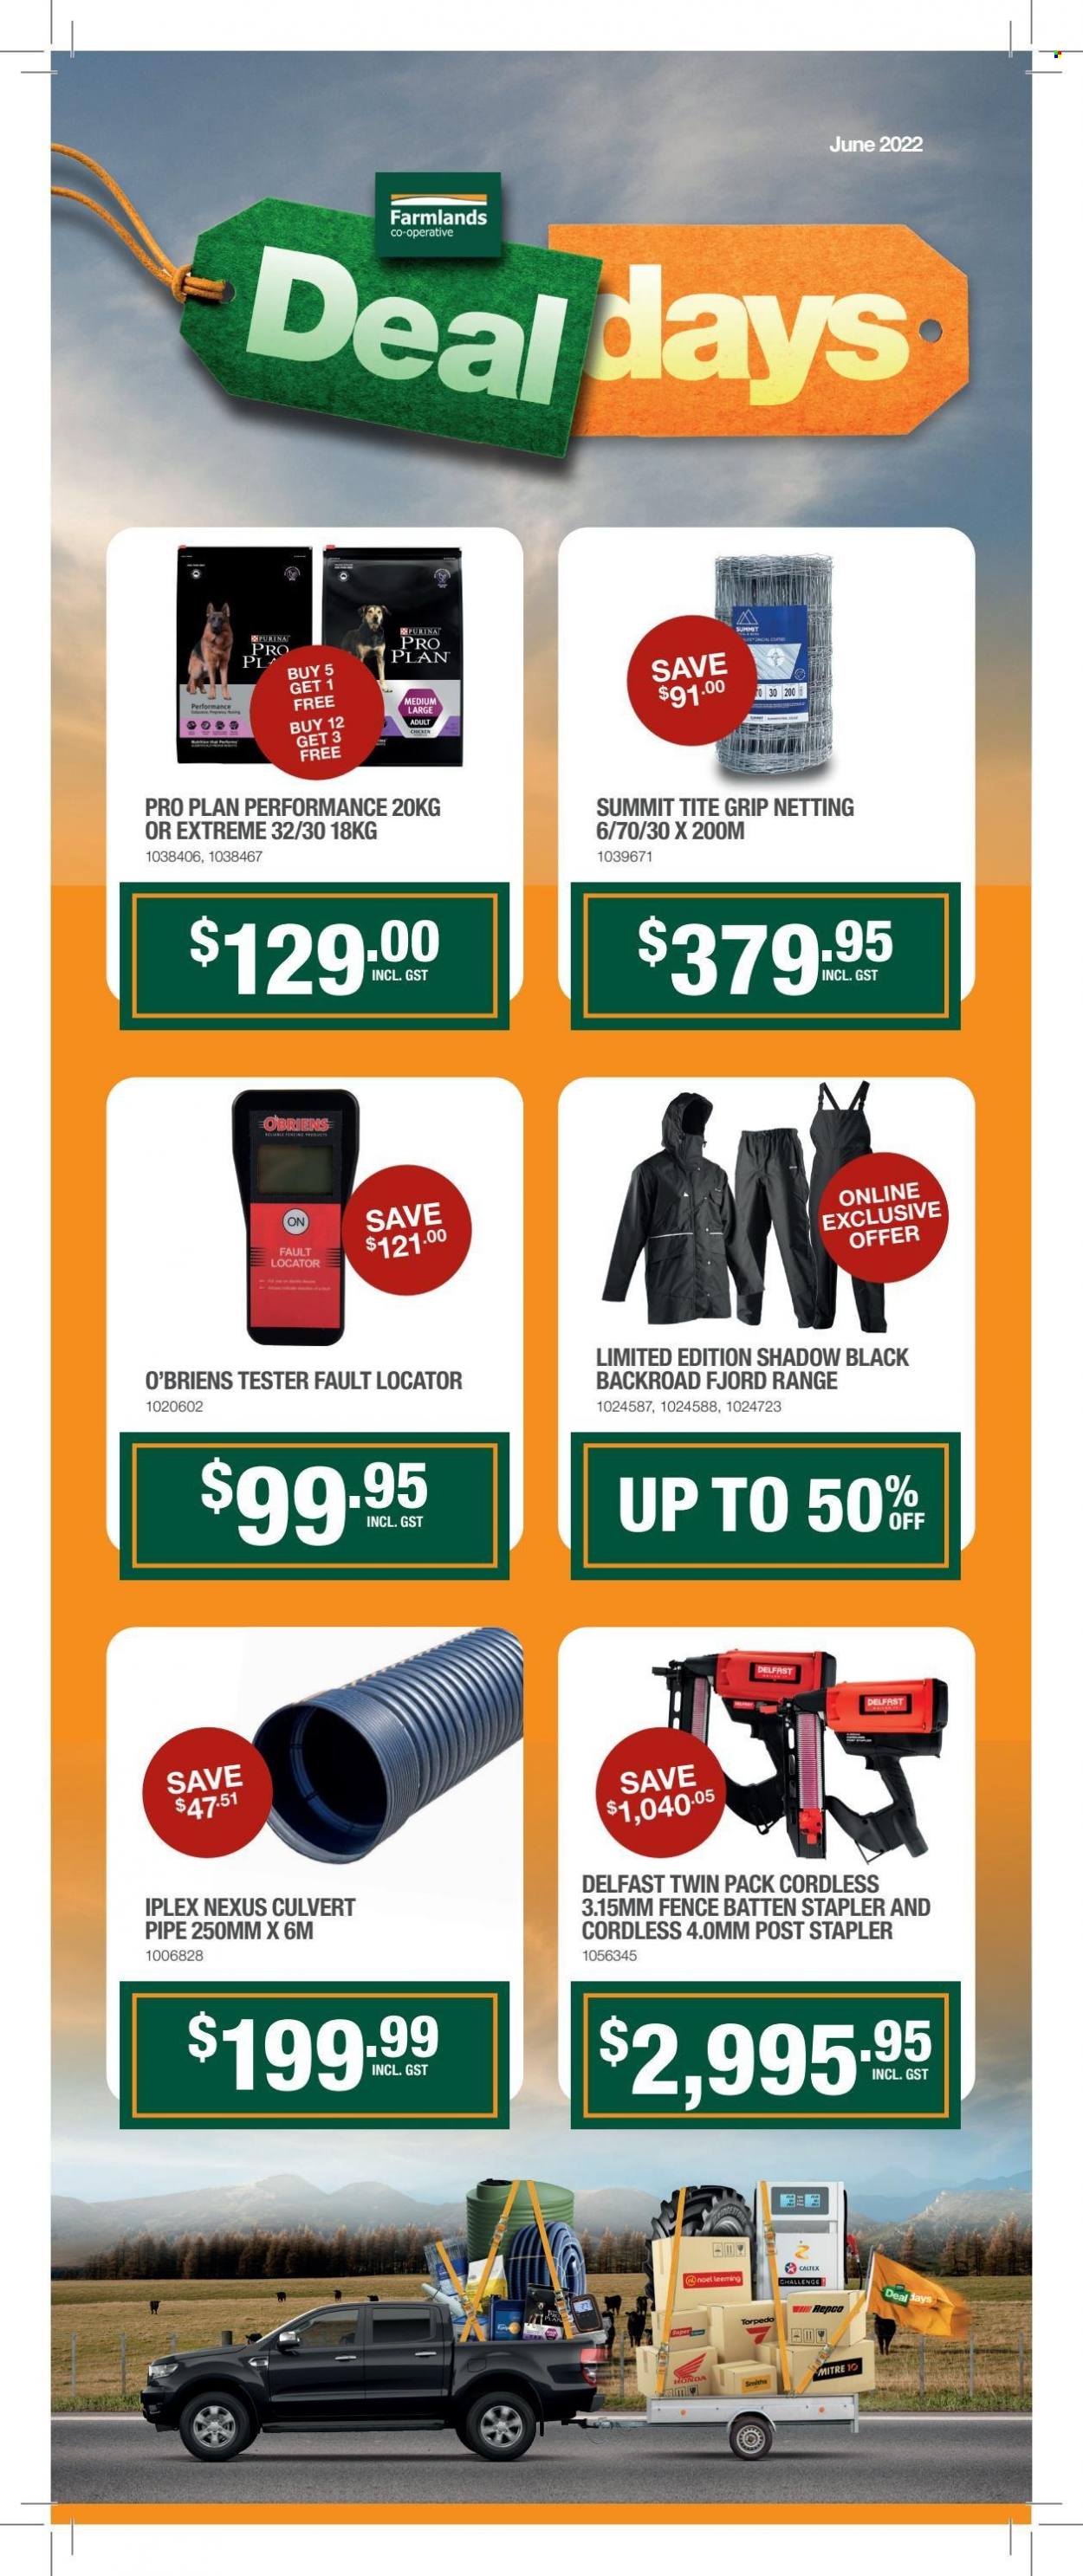 Farmlands mailer - 01.06.2022 - 30.06.2022 - Sales products - PRO PLAN, Purina, pipe. Page 1.